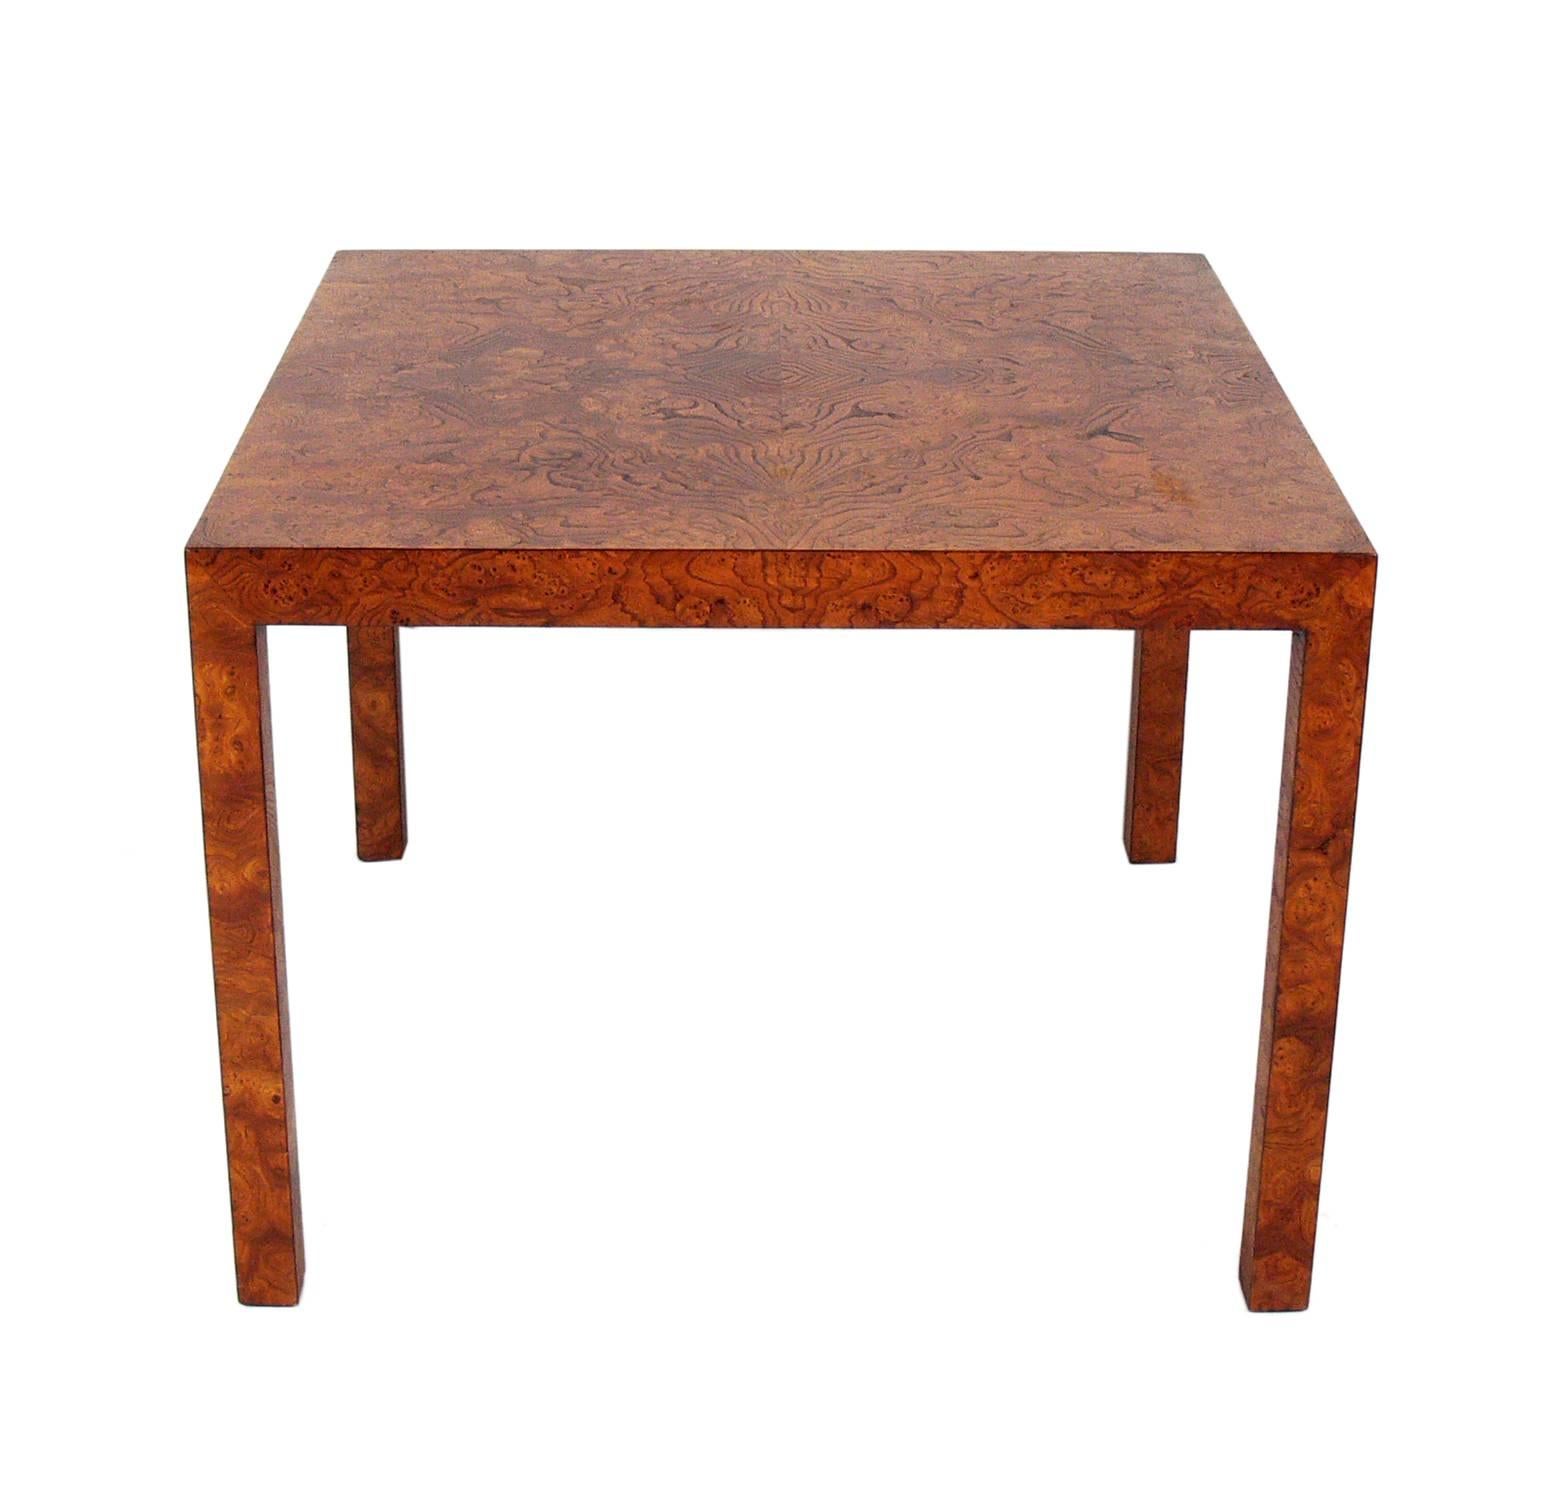 Clean lined burl wood parson side or center table, American, circa 1950s. Retains warm original patina.